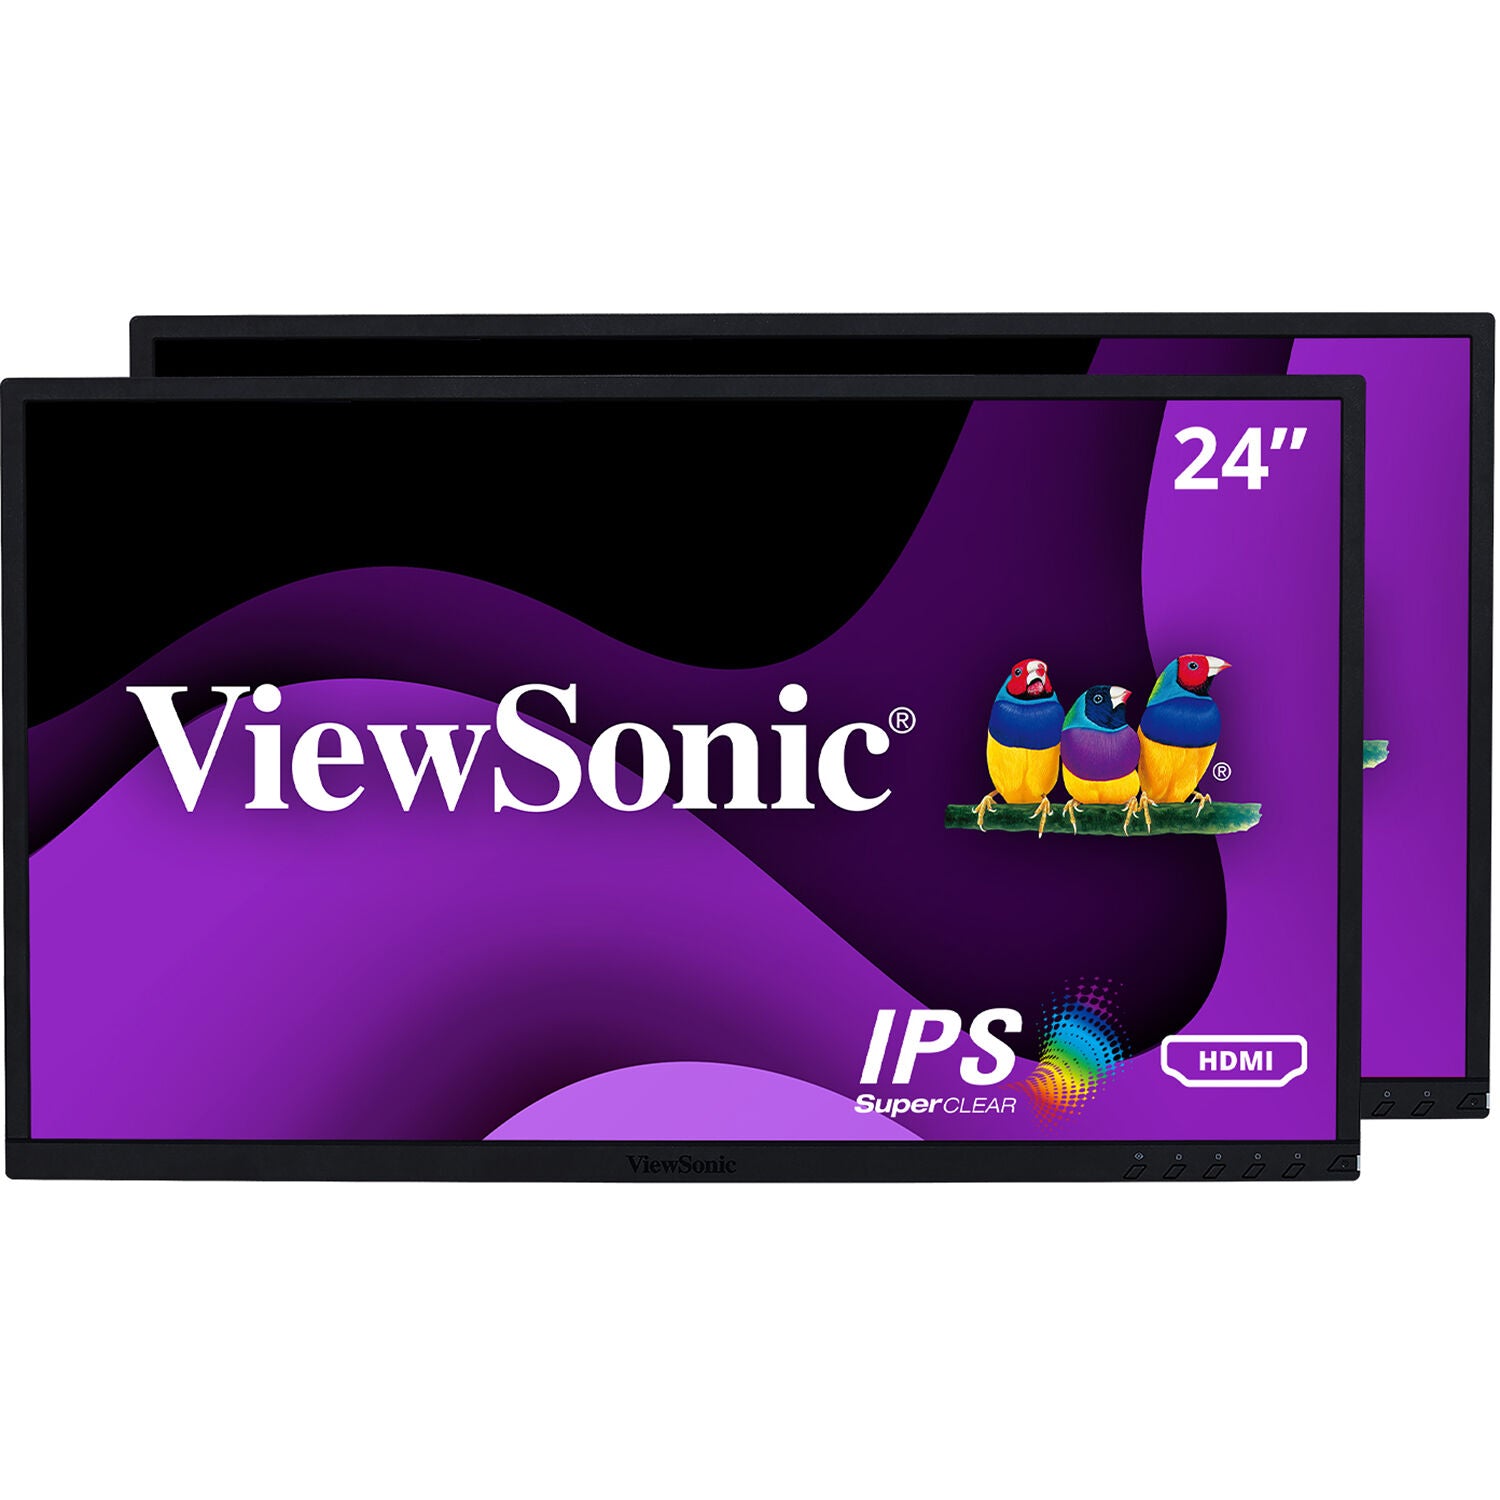 ViewSonic VG2448A-2_H2-S 24" Dual Pack Head-Only 1080p IPS Monitor - Certified Refurbished